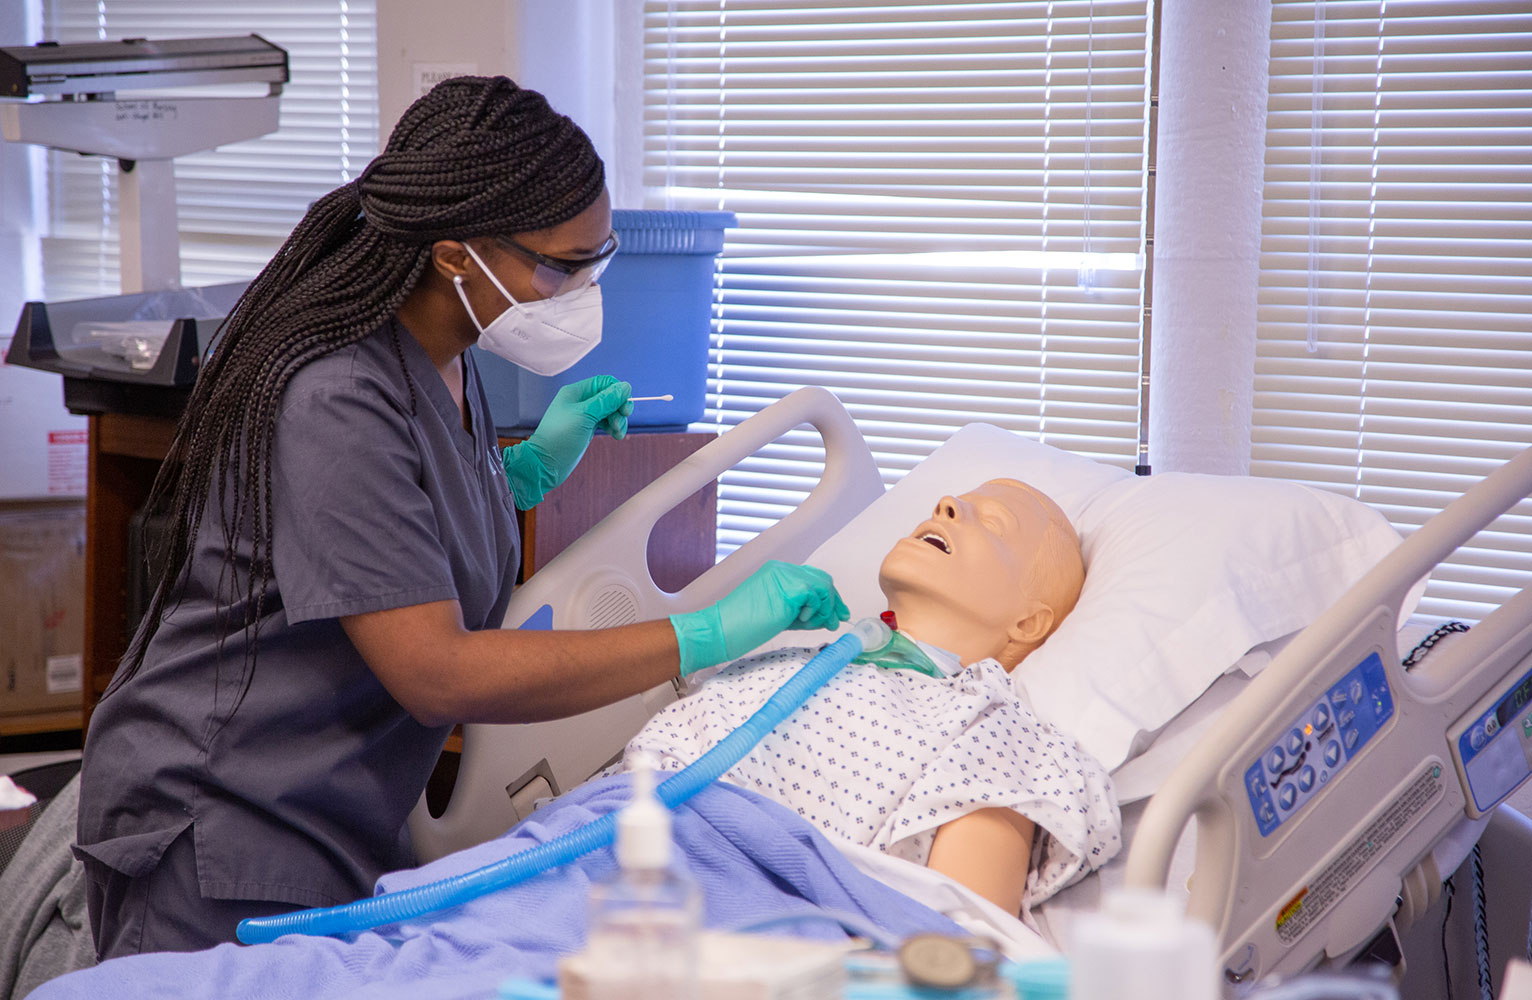 A nursing student leans over a dummy in a simulated training environment